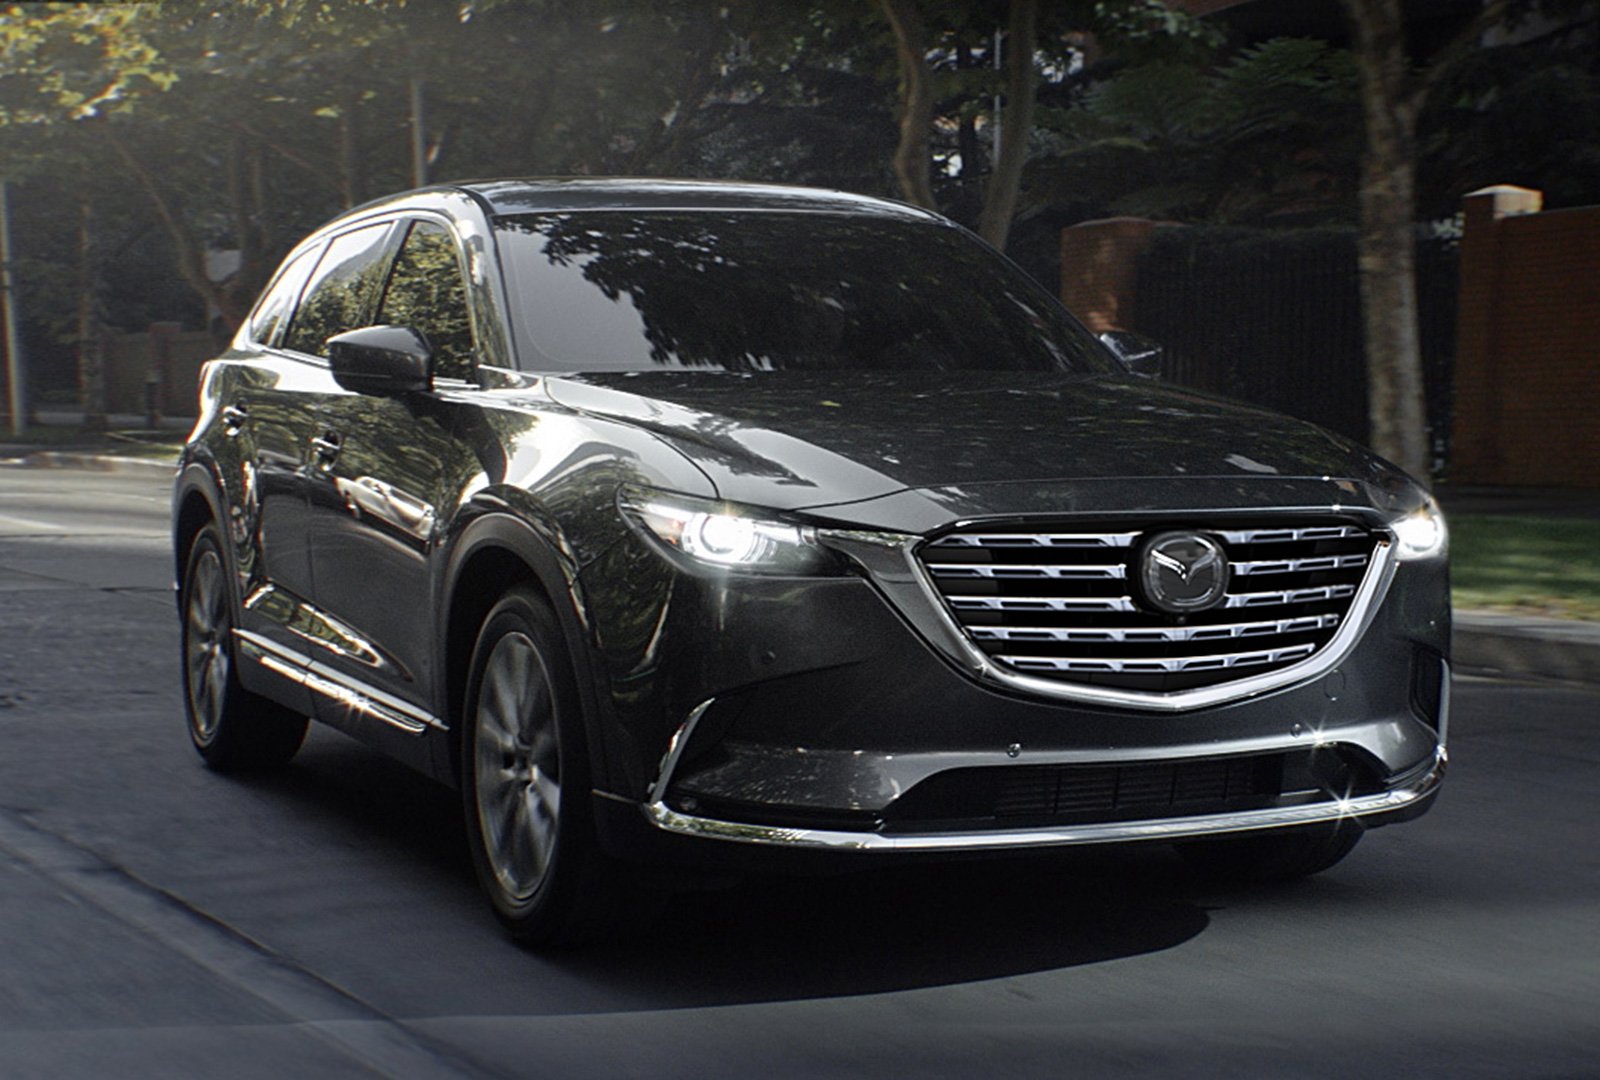 Mazda CX-9 approaches with headlights on